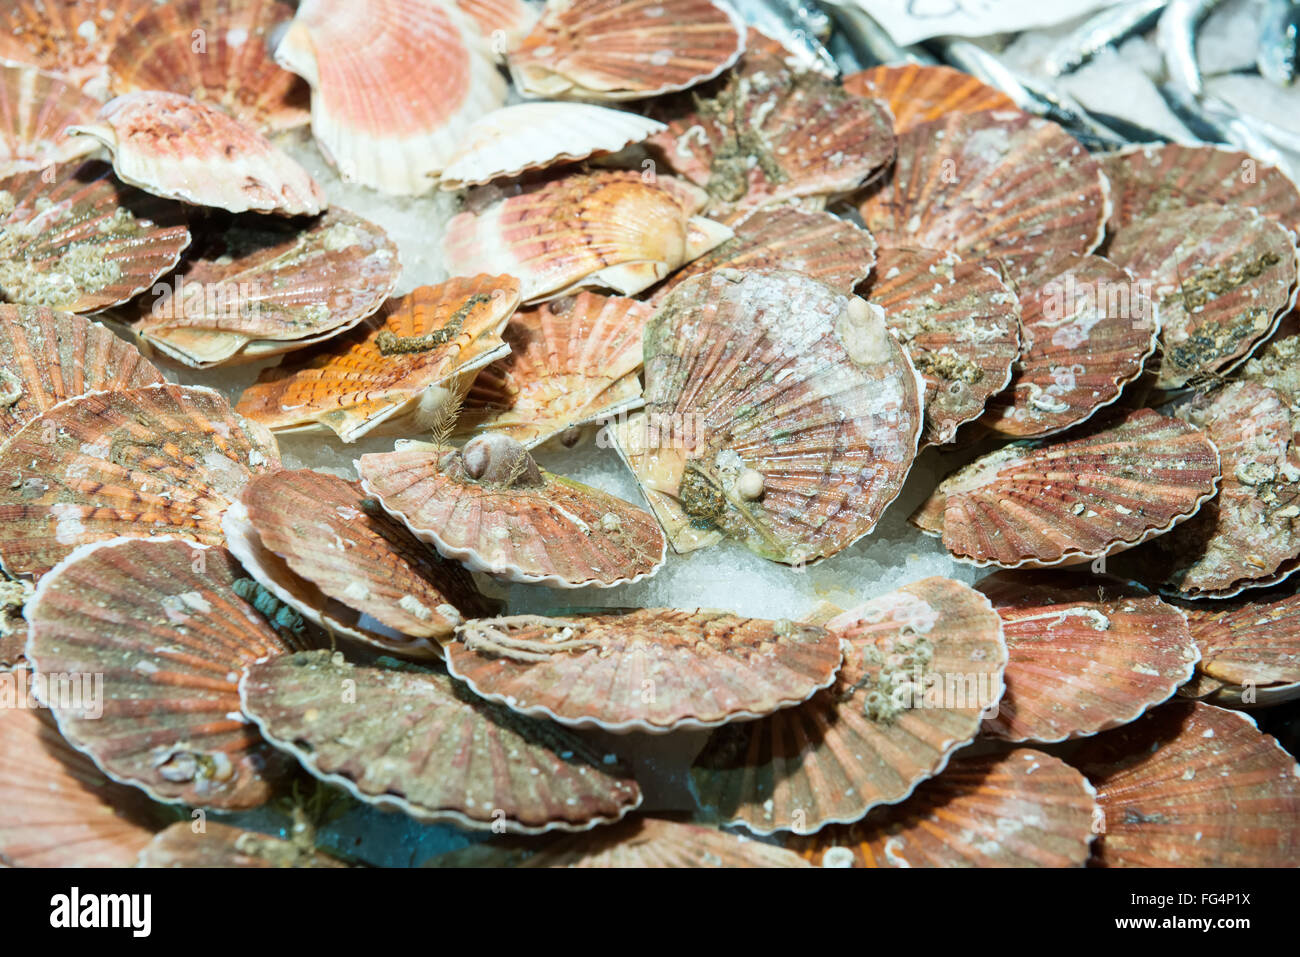 scallops to market the fish freshly caught and ready for sale Stock Photo